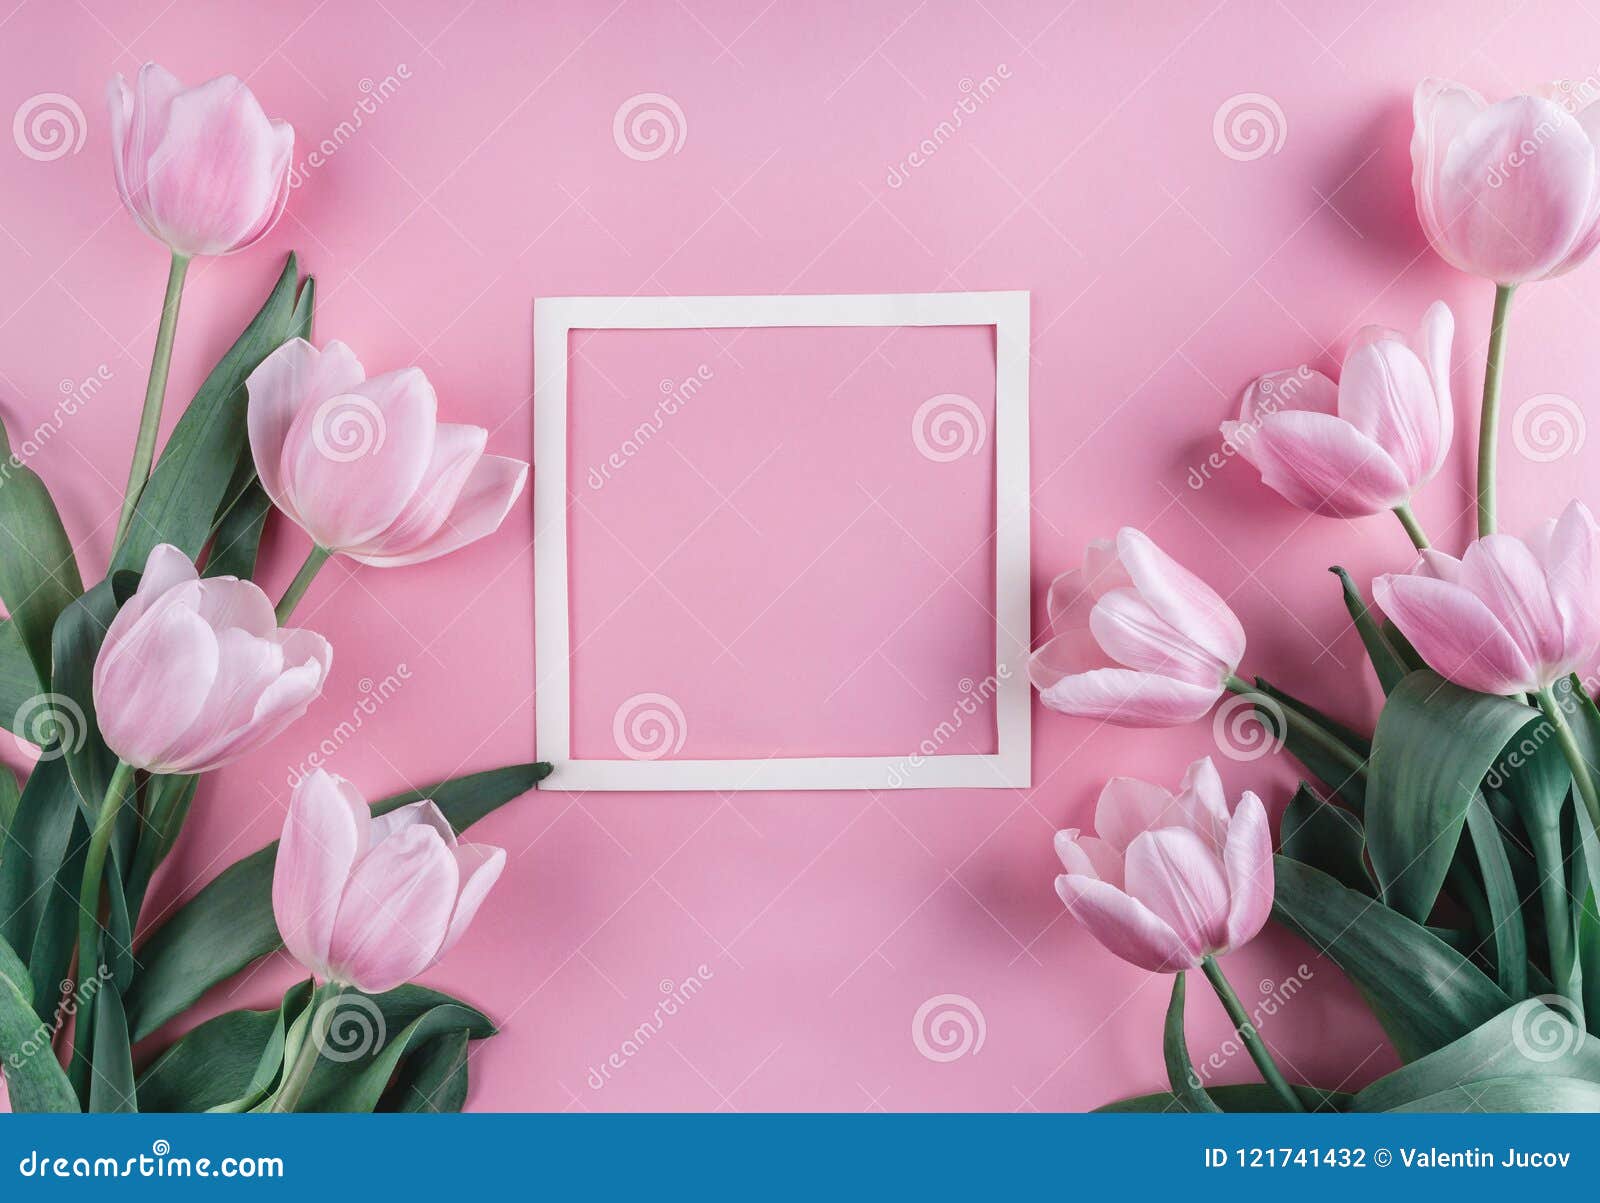 pink tulips flowers and sheet of paper over light pink background. saint valentines day frame or background.